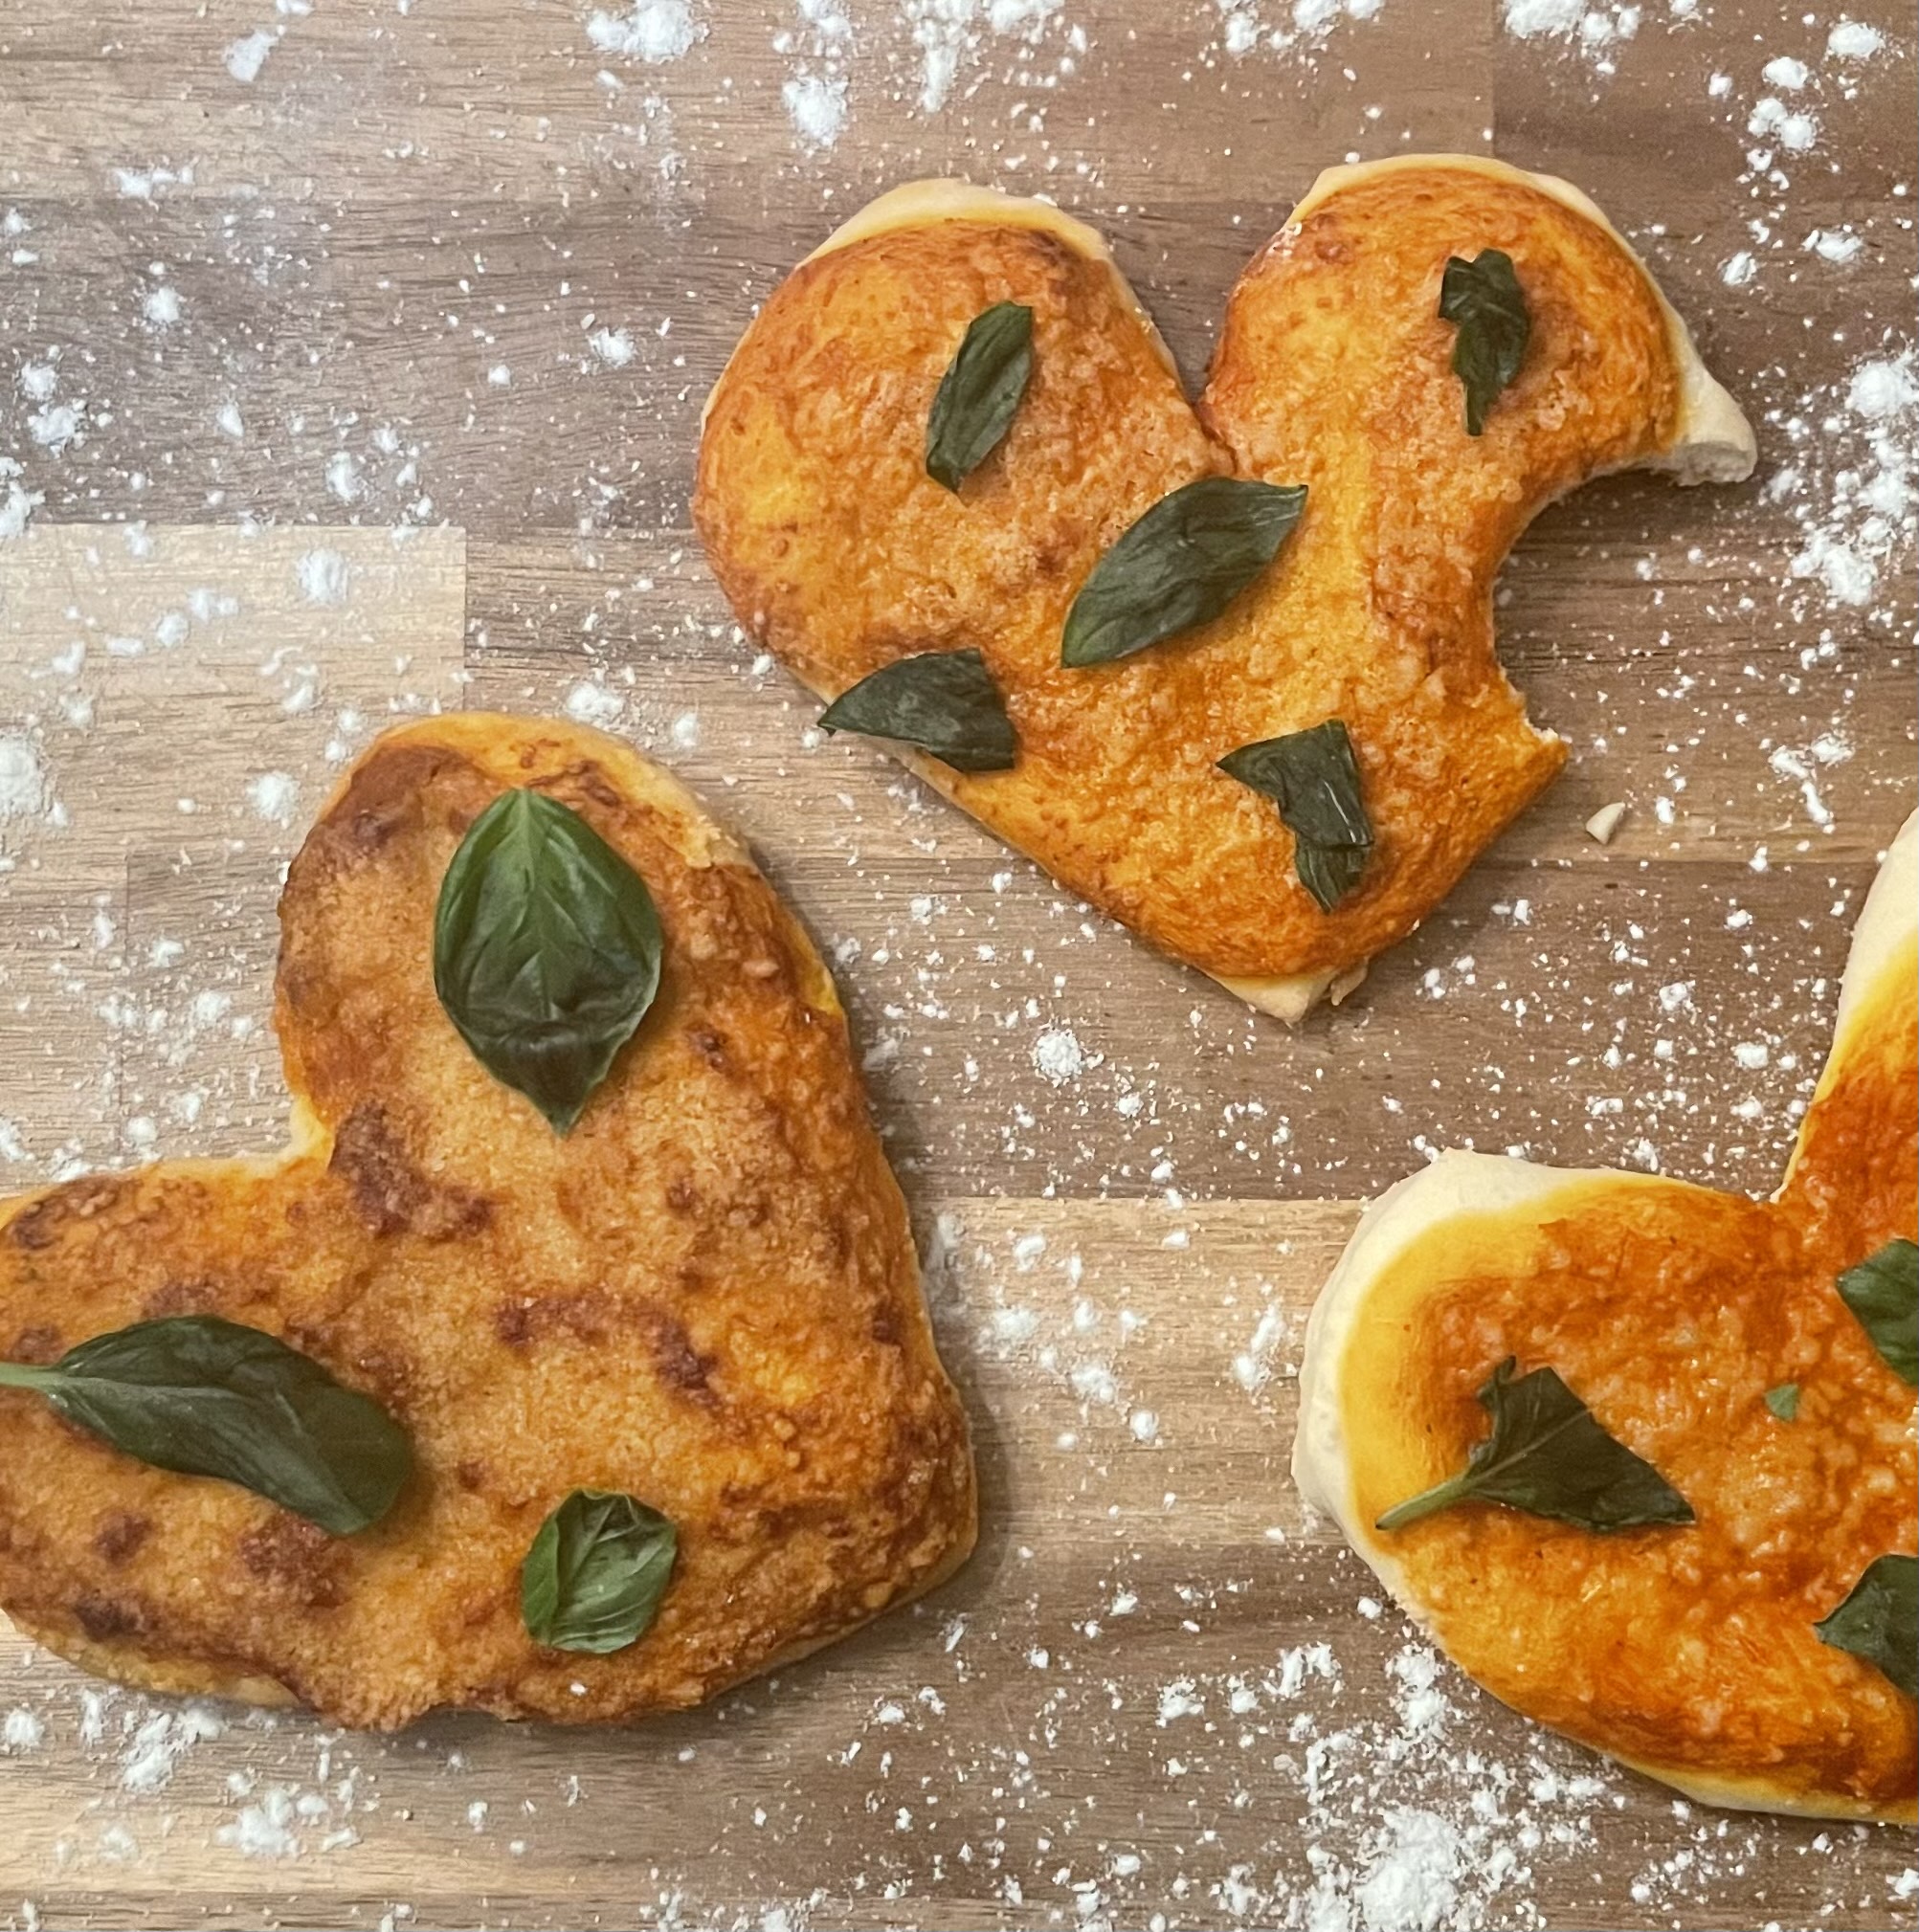 Freshly baked heart-shaped pizzas, topped with parmesan and basil are a fun and easy recipe to try.